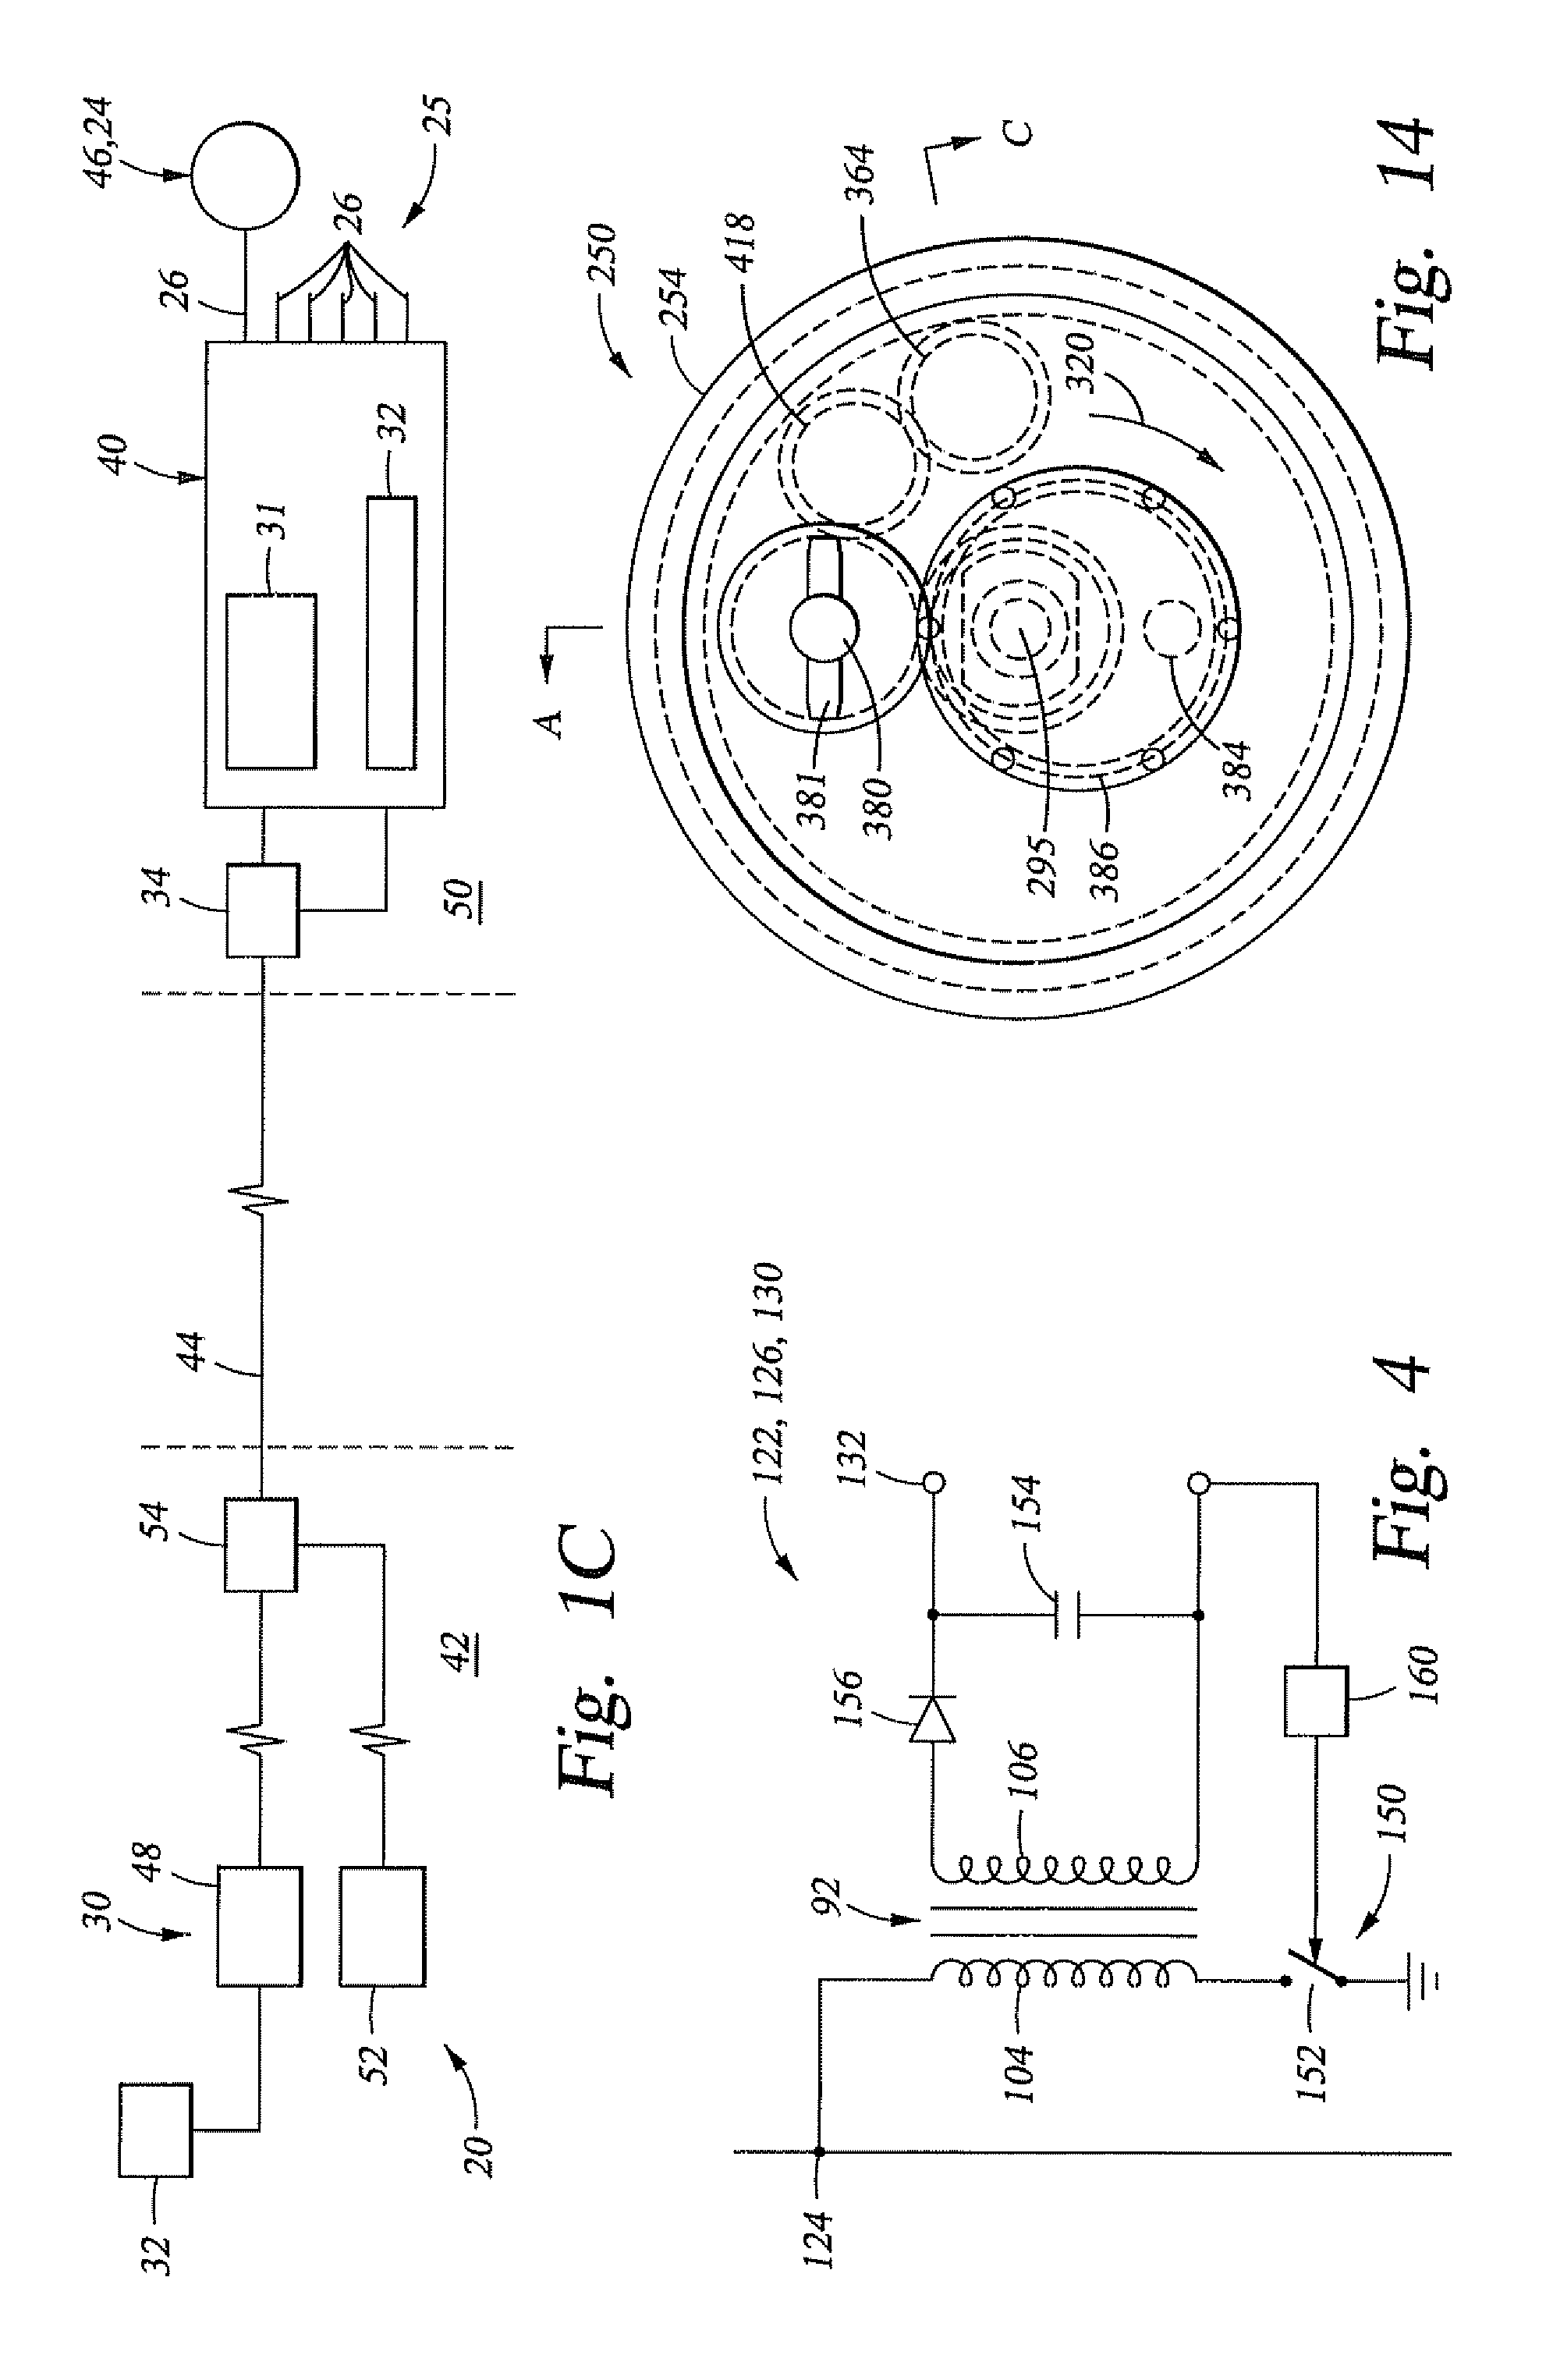 Electric control and supply system